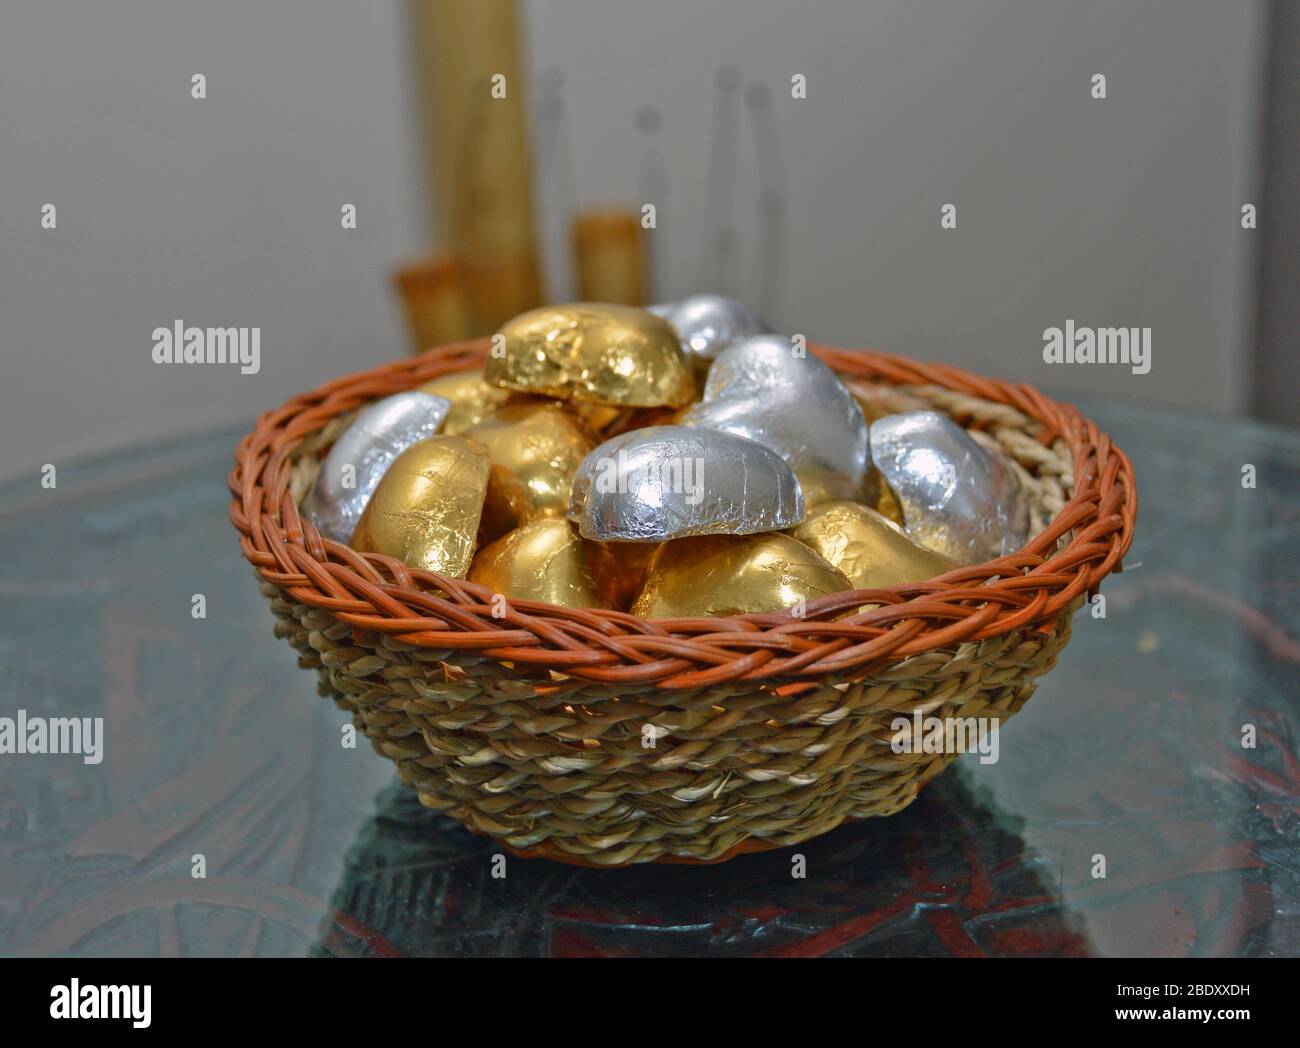 Wicker bowl decorative item filled with various shiny stones, interior decor ideas for massage parlor, great for oriental therapy sessions Stock Photo